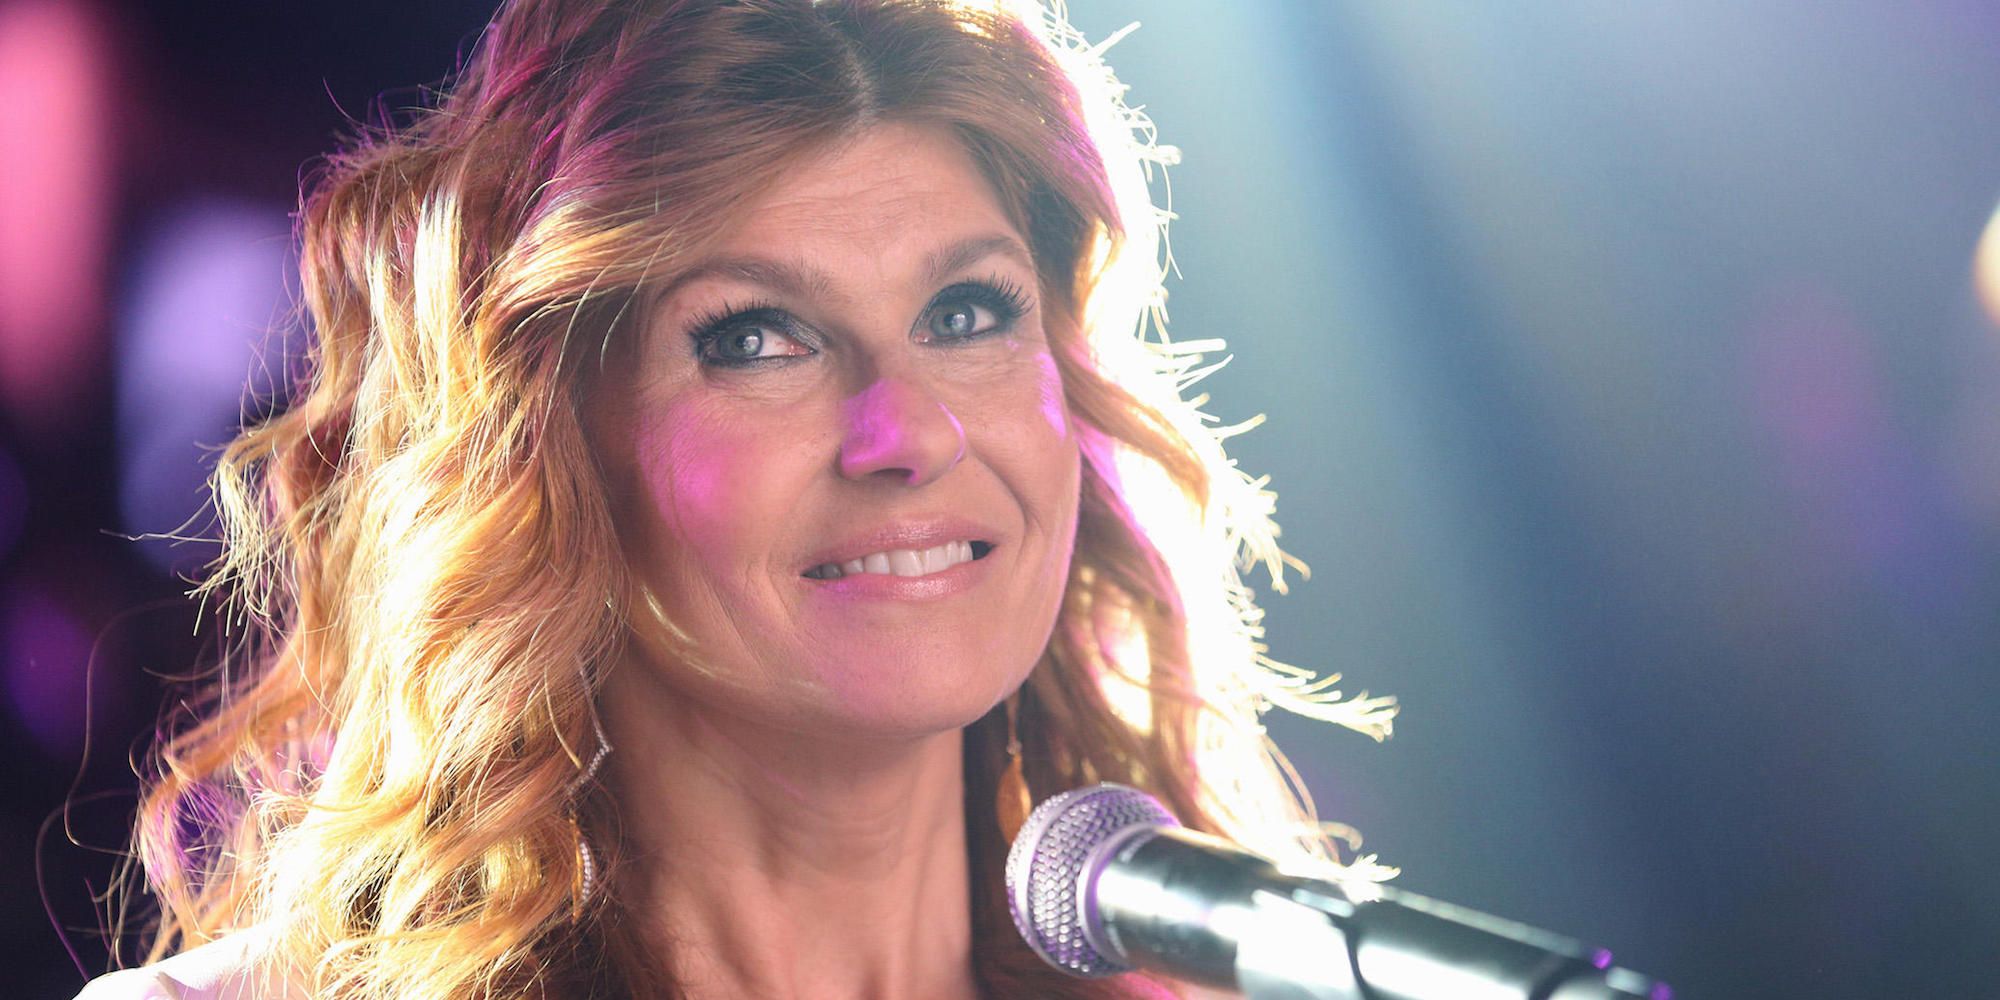 Rayna smiling as she performs on stage